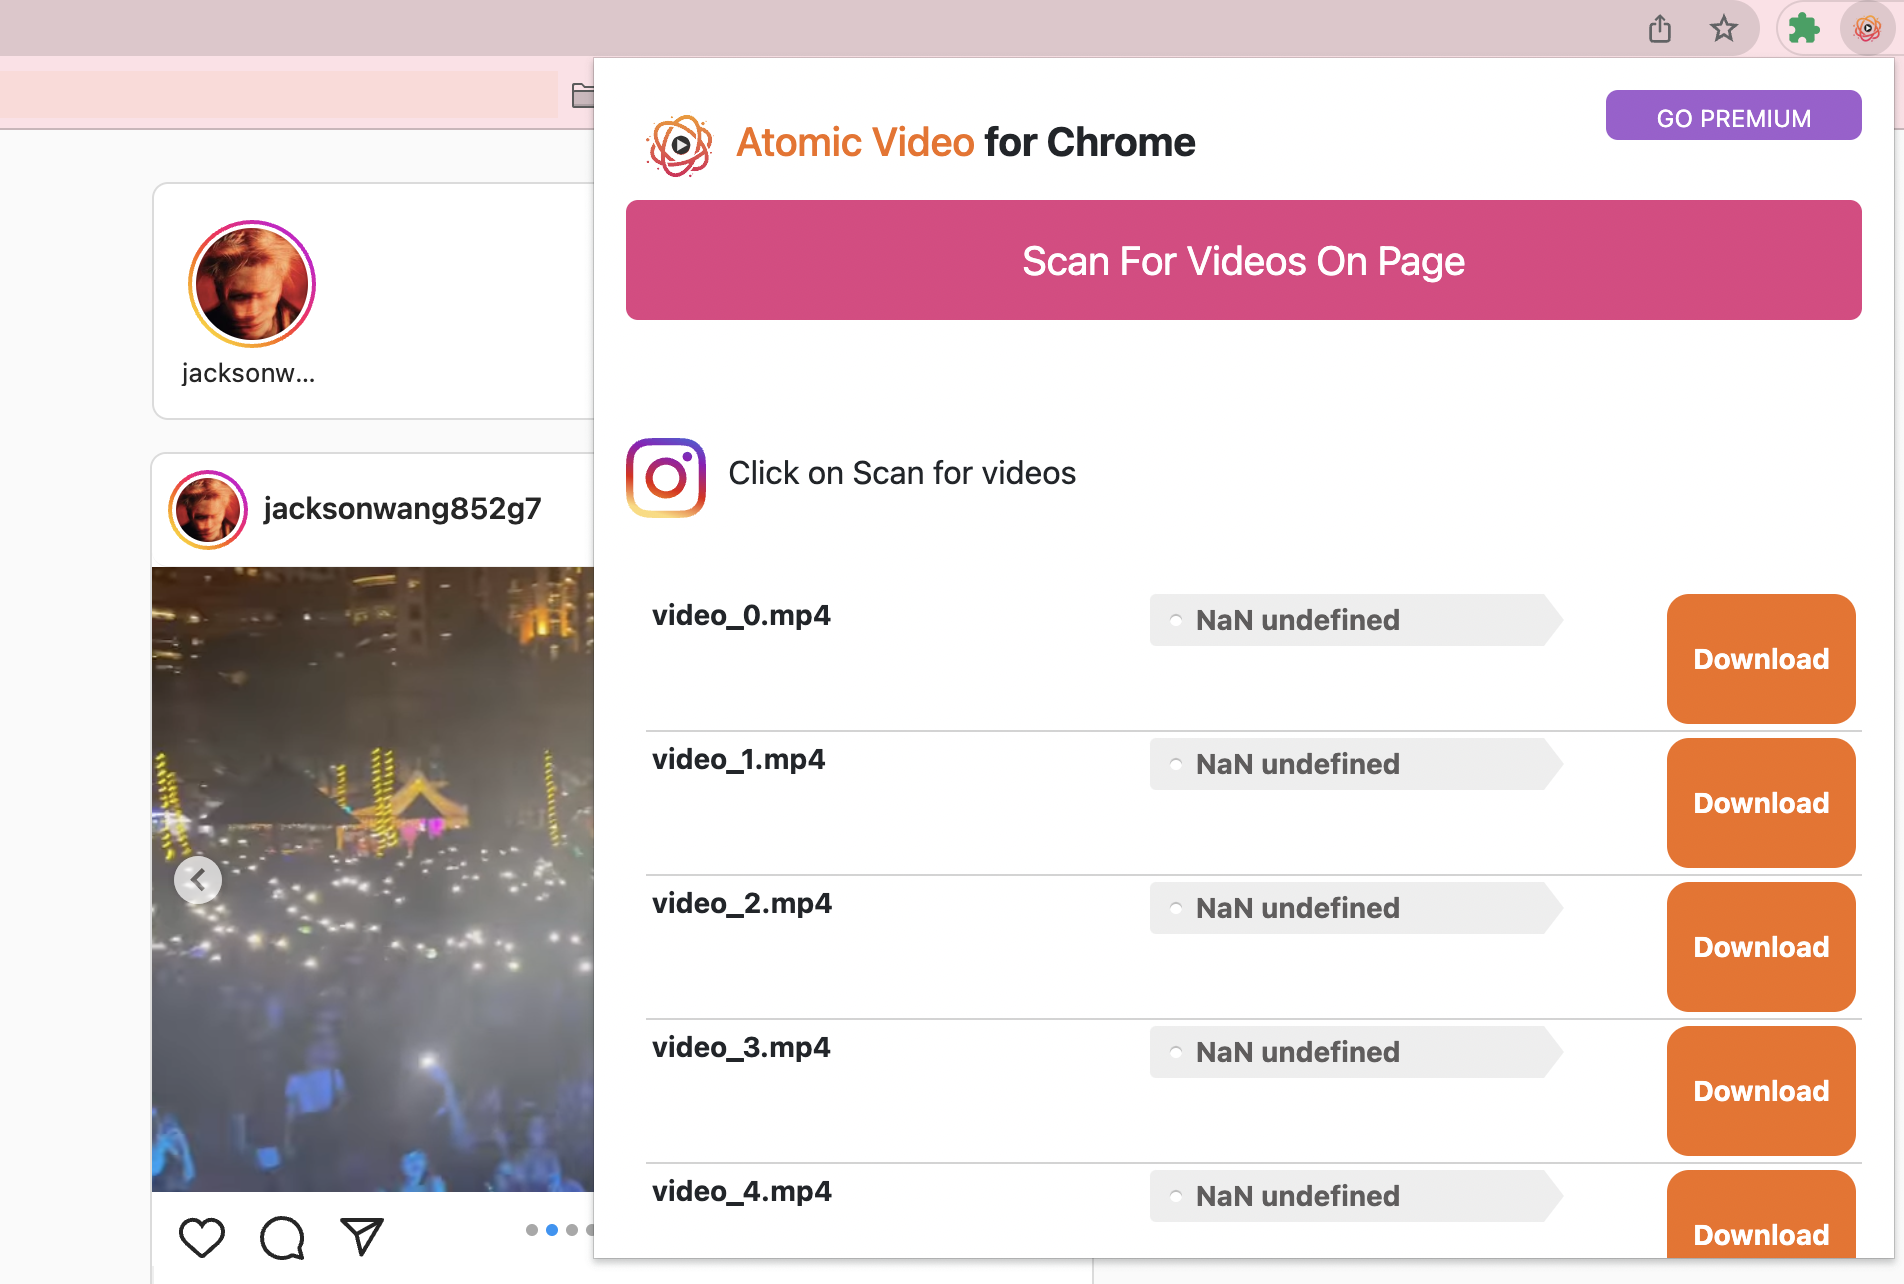 Atomic Video Downloader can download and save multiple online video formats such as FLV, MP4, MOV, WEBM, and more from the most popular video websites. It can automatically identify downloadable videos in the current page.